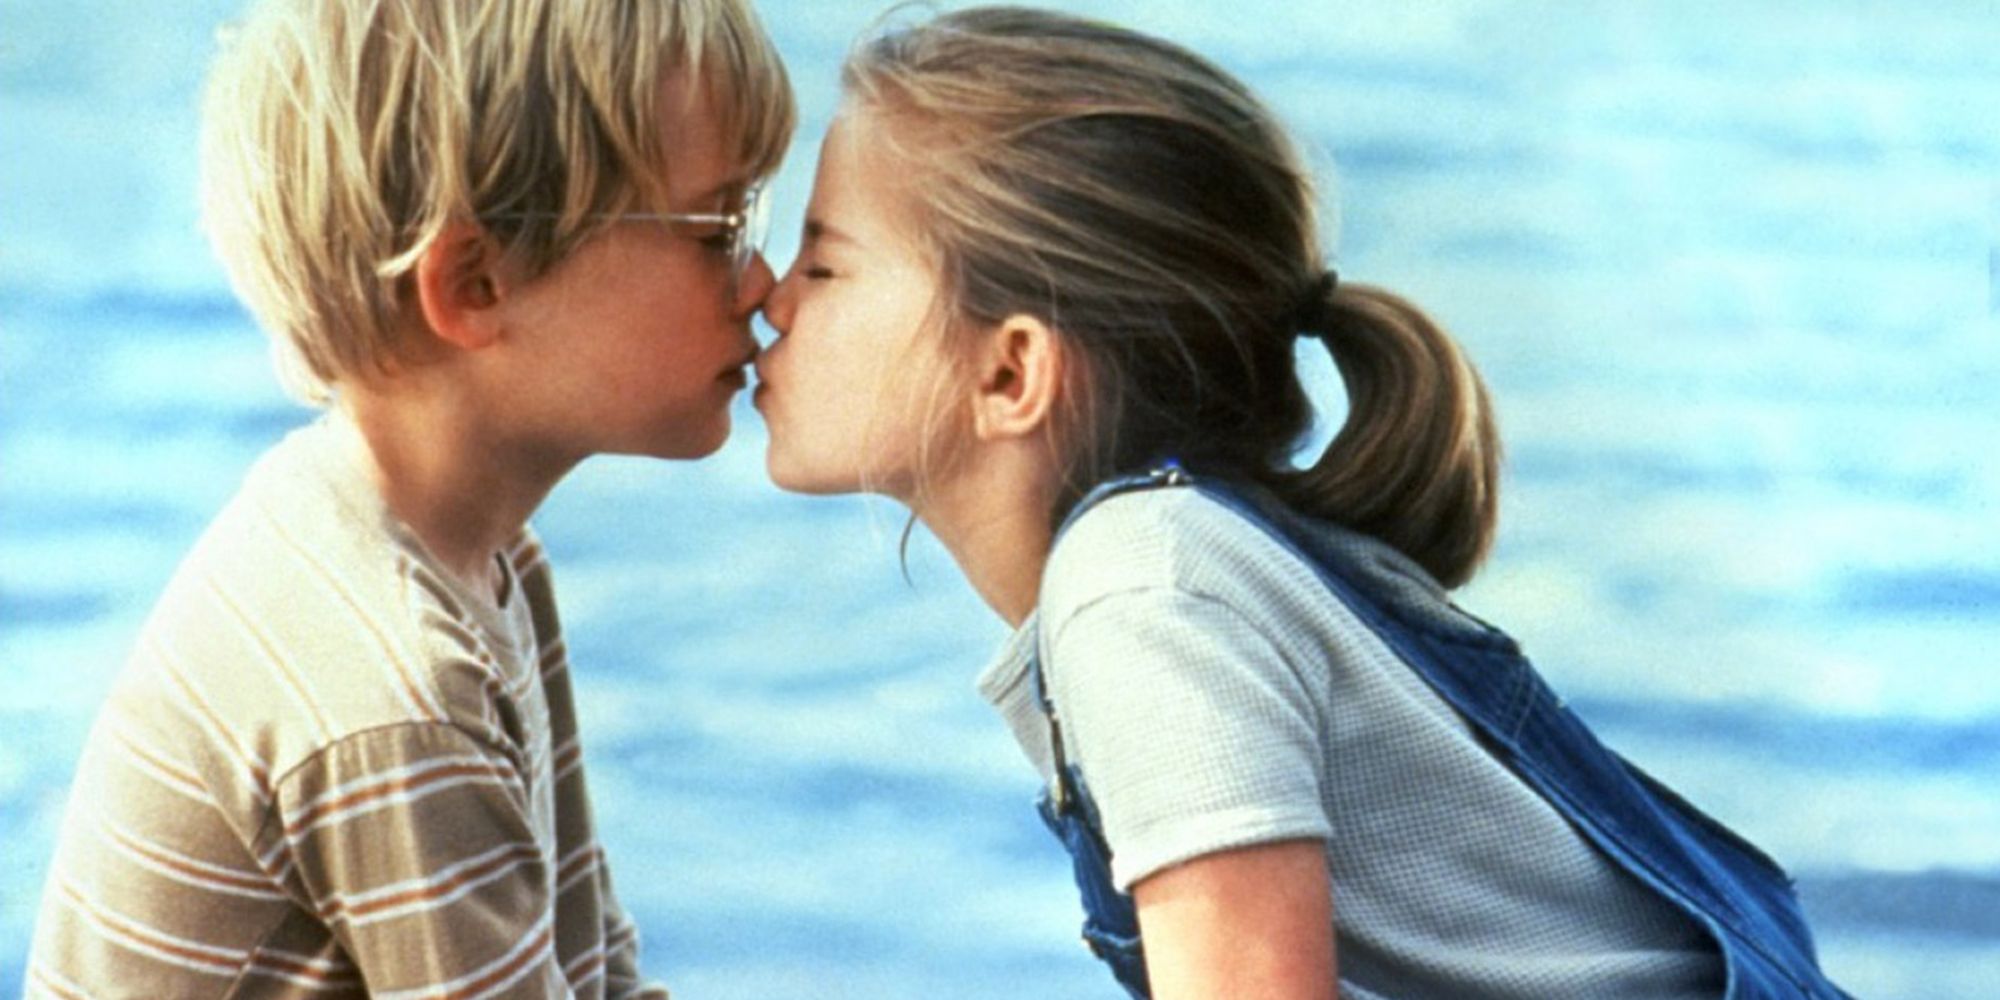 recent romantic movies with happy endings that make you cry